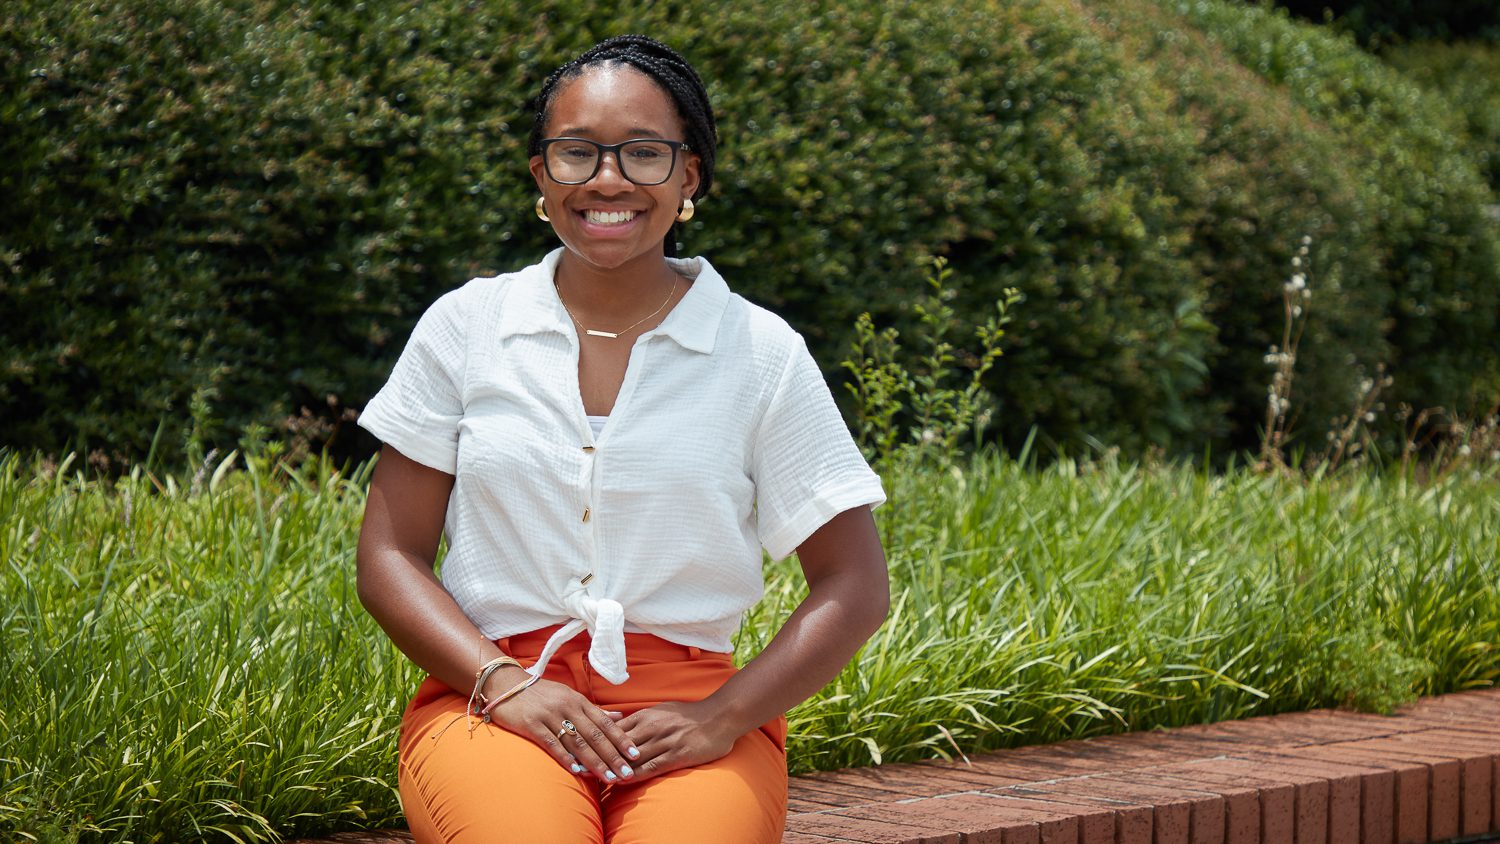 Black woman wearing a white shirt and orange pants sits on a brick ledge in front of greenery.